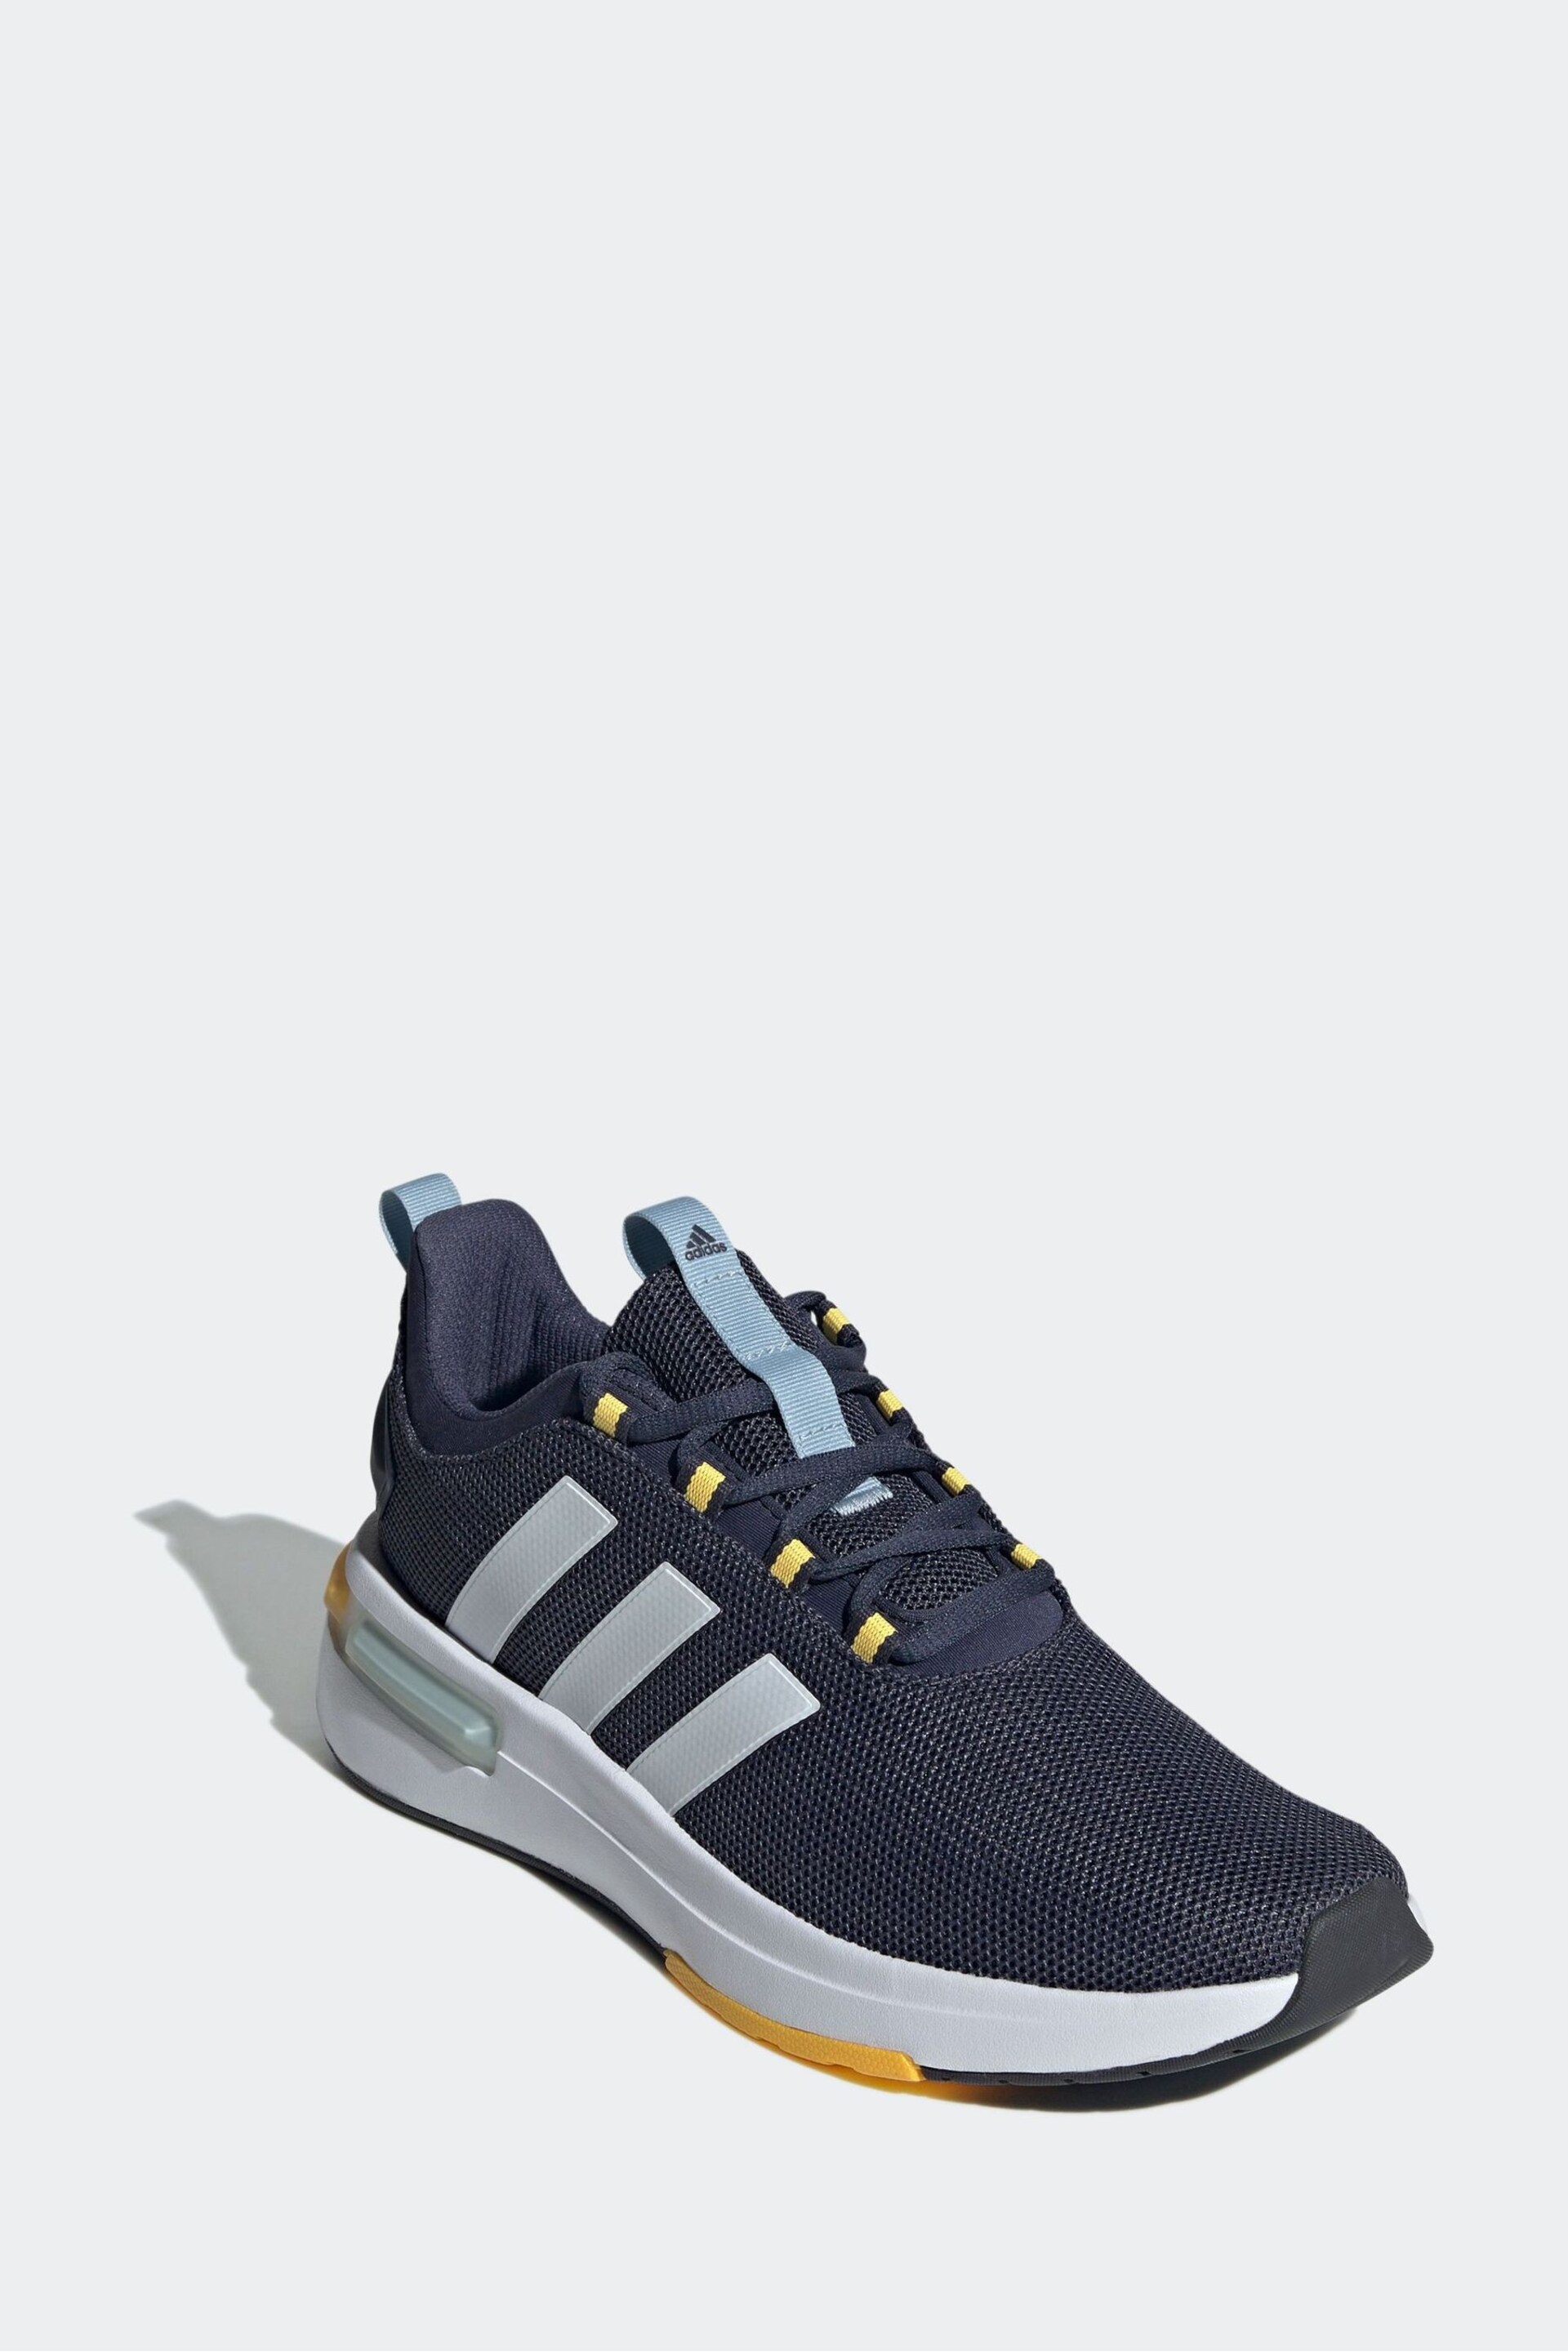 adidas Blue Sportswear Racer TR23 Trainers - Image 3 of 9